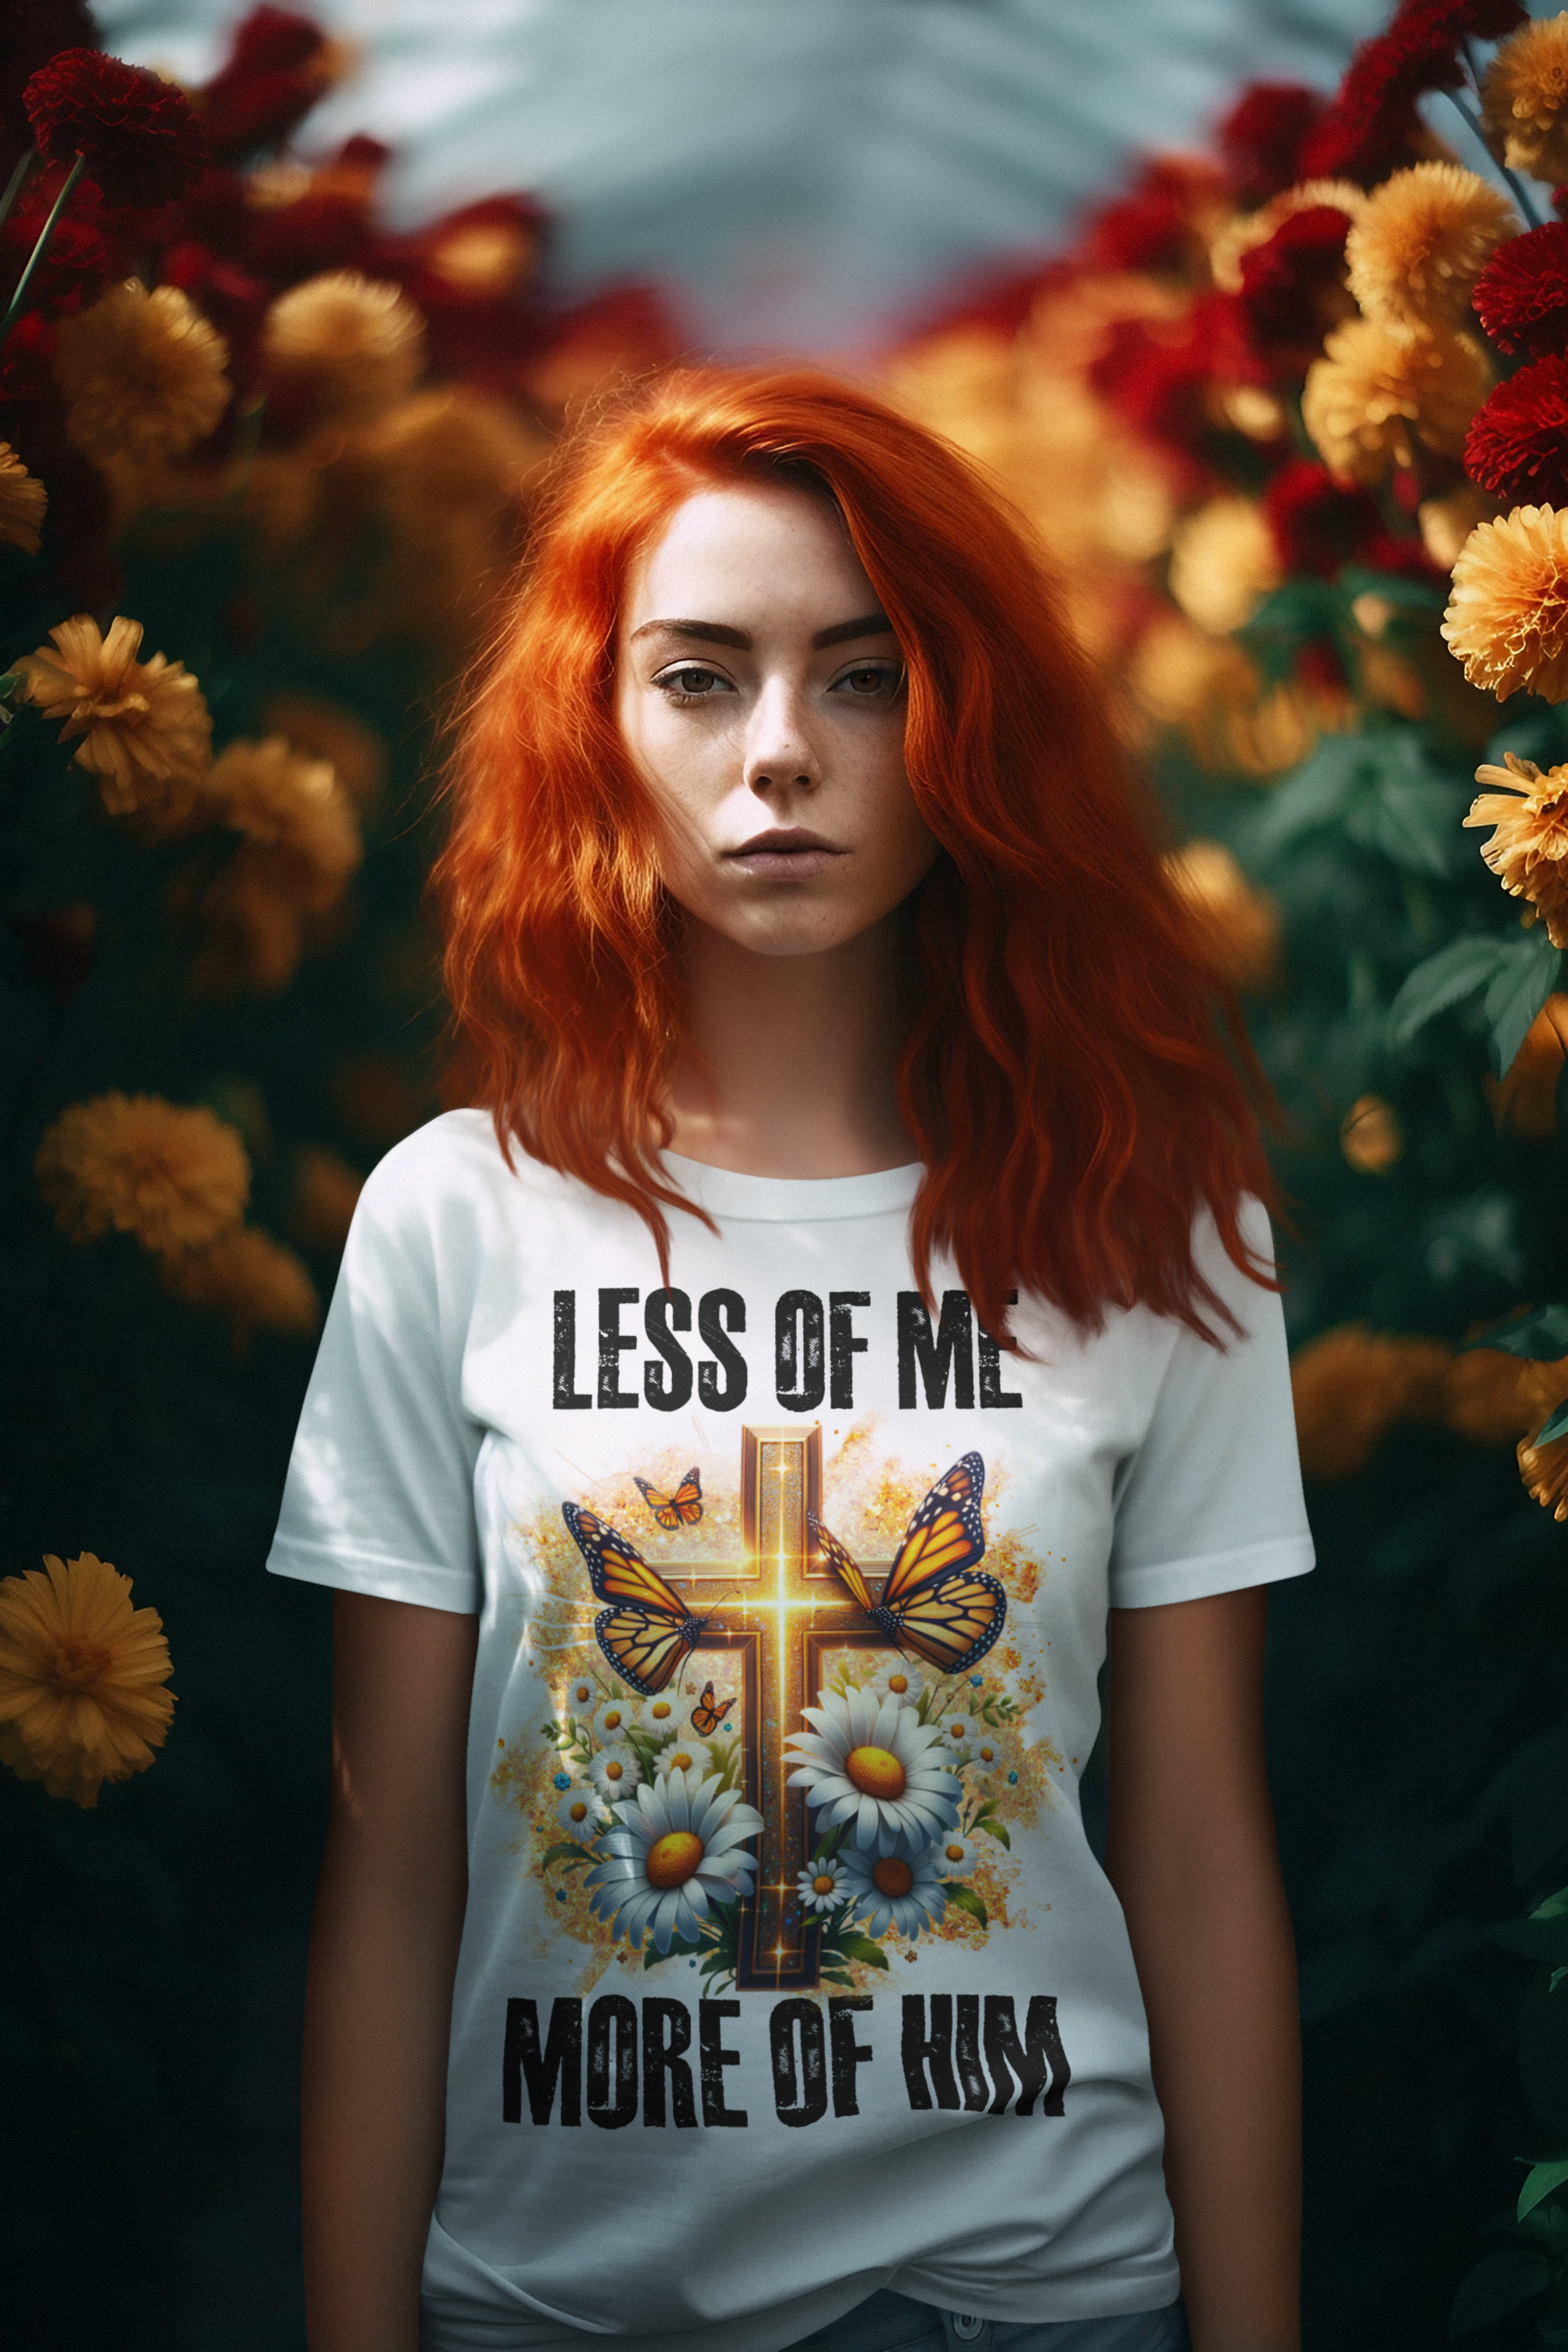 Faith in Full Bloom: 'Less of Me -More of Him' T-shirt with Vibrant Cross and Daisy Design Empowering T-Shirt Collection T-Shirt 23 Daisy Designs & Creations LLC